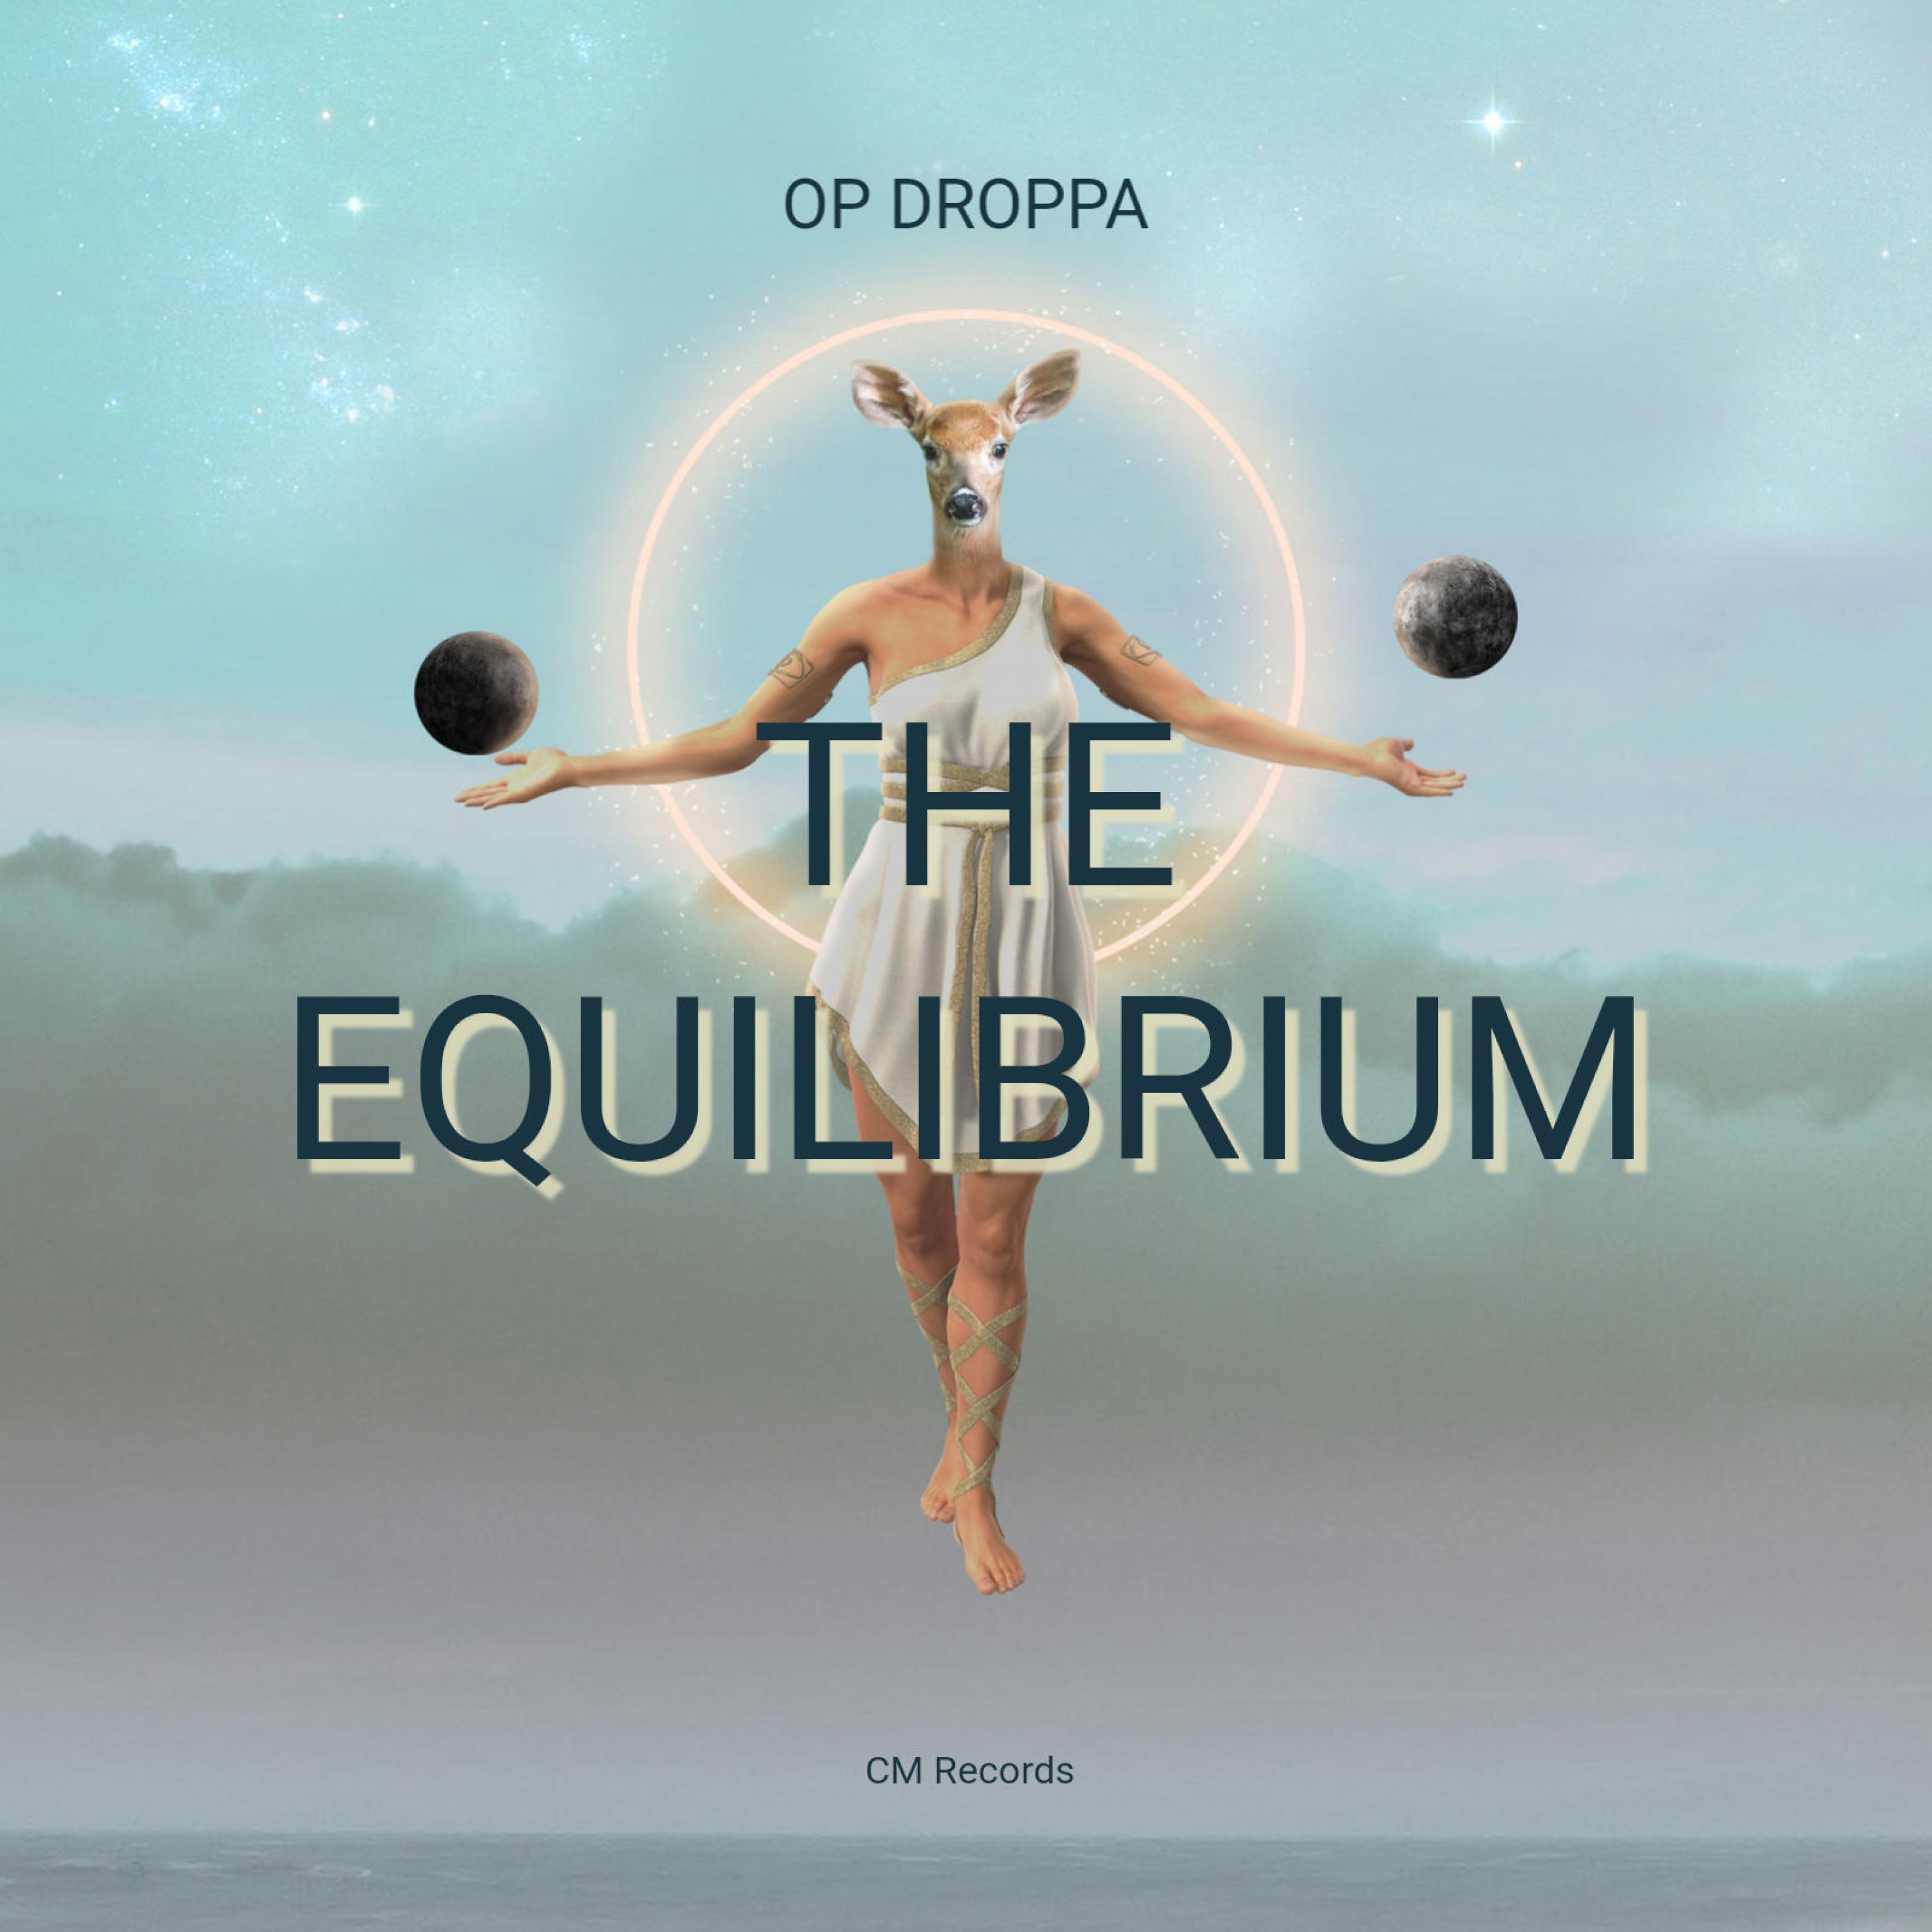 Op droppa - The Equilibrium